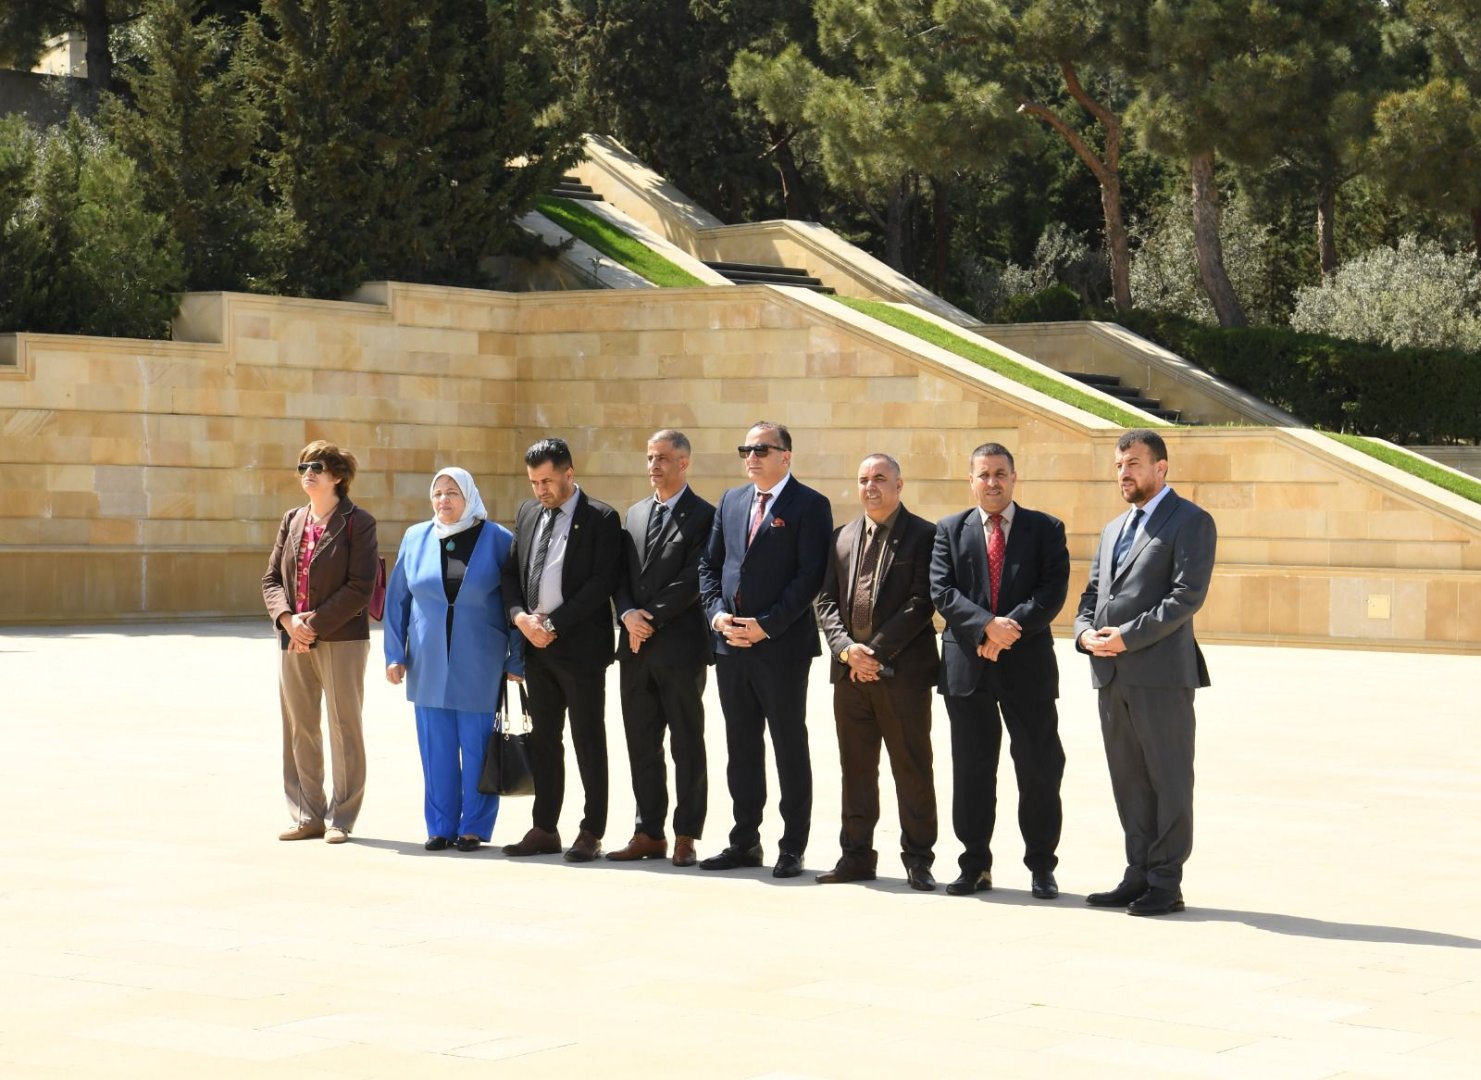 Algerian MPs pay tribute to Great Leader Heydar Aliyev and Azerbaijani martyrs (PHOTO)